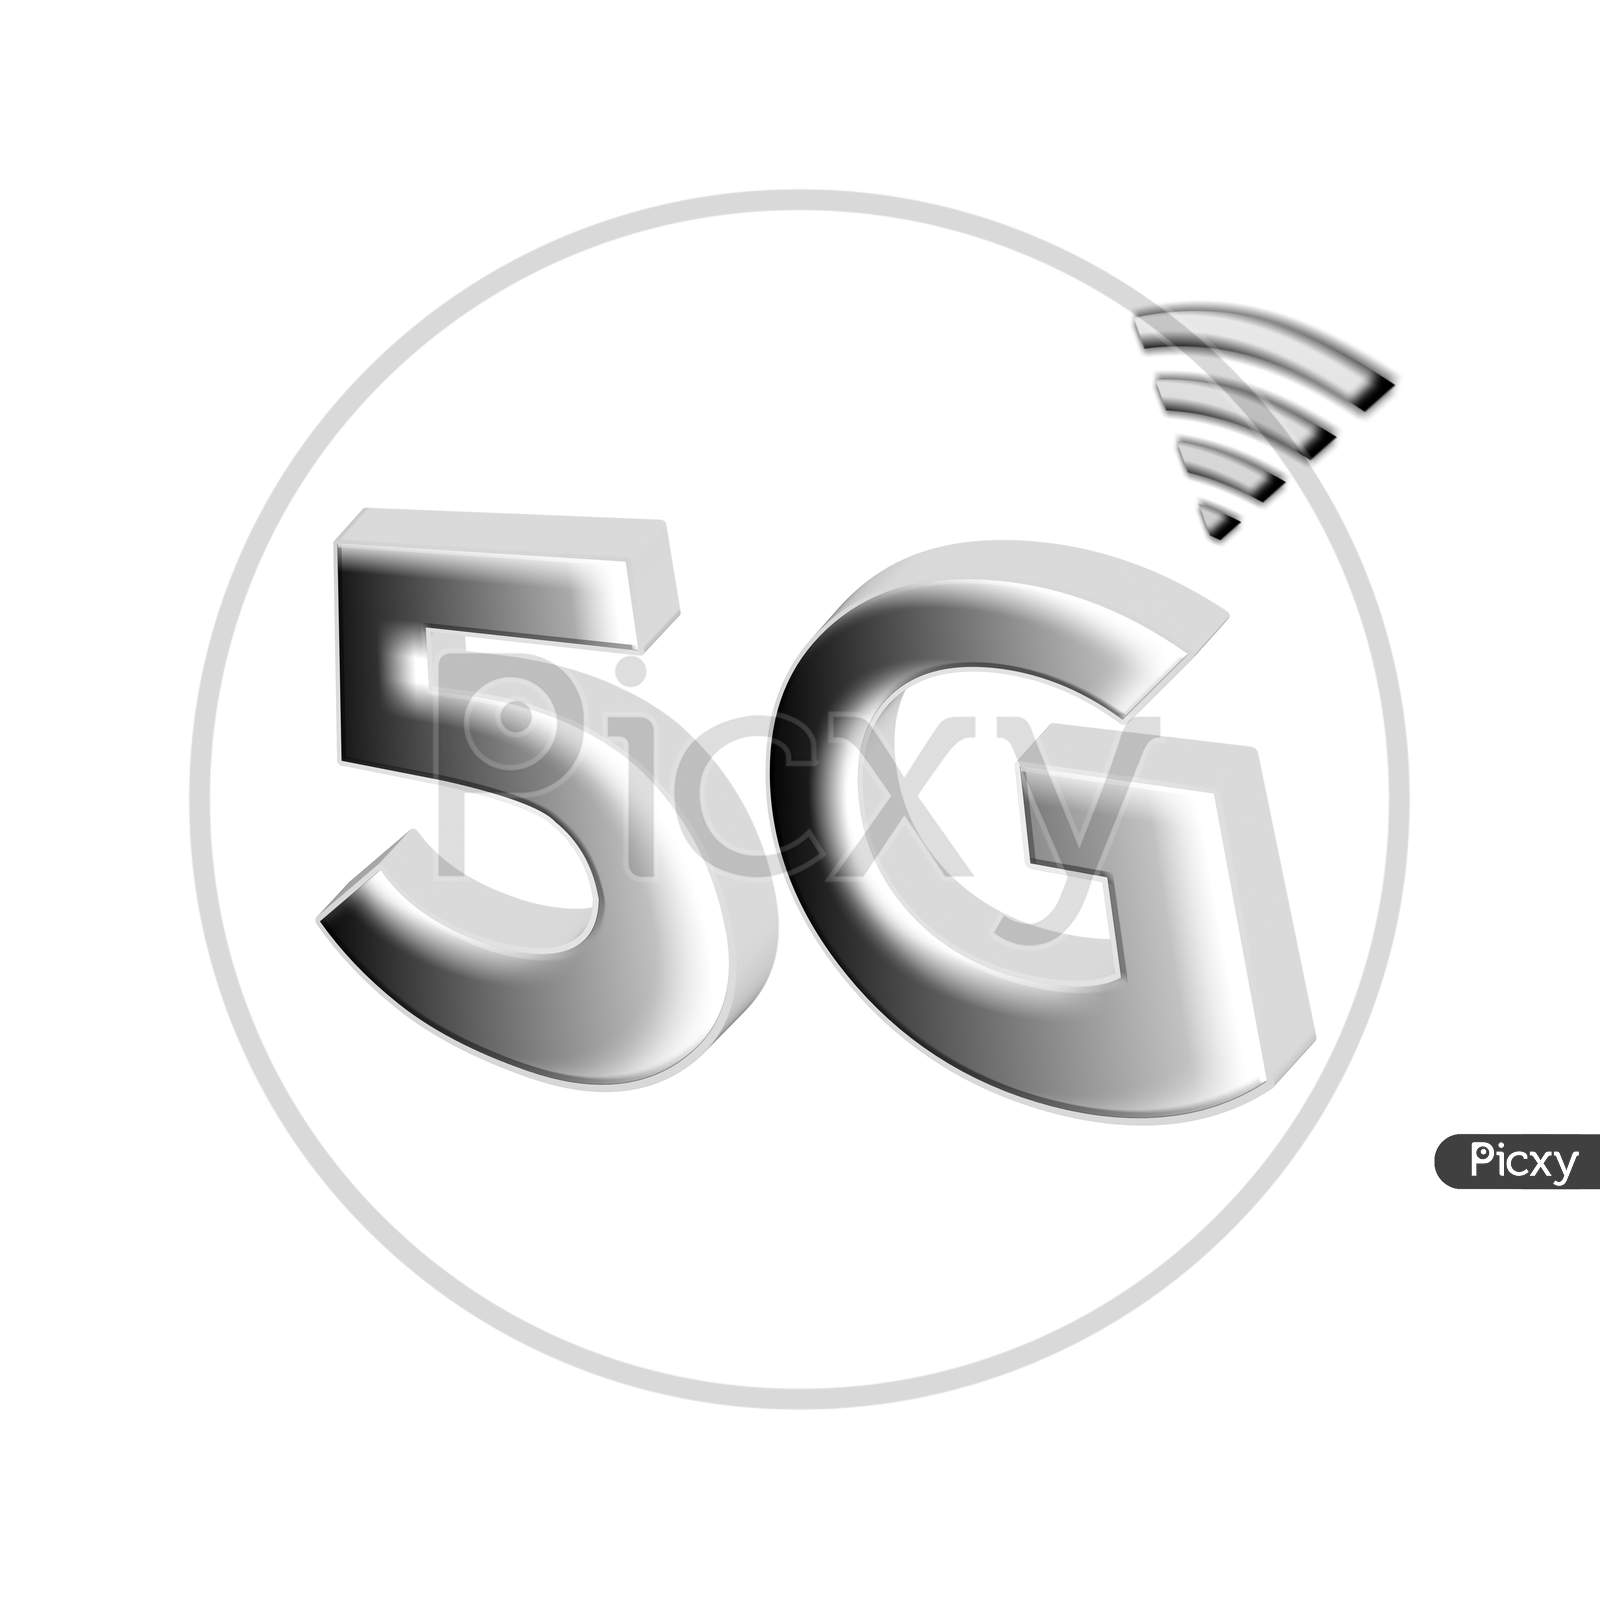 Illustration Of A Silver Color 5G Network Icon, Isolated On A White Background